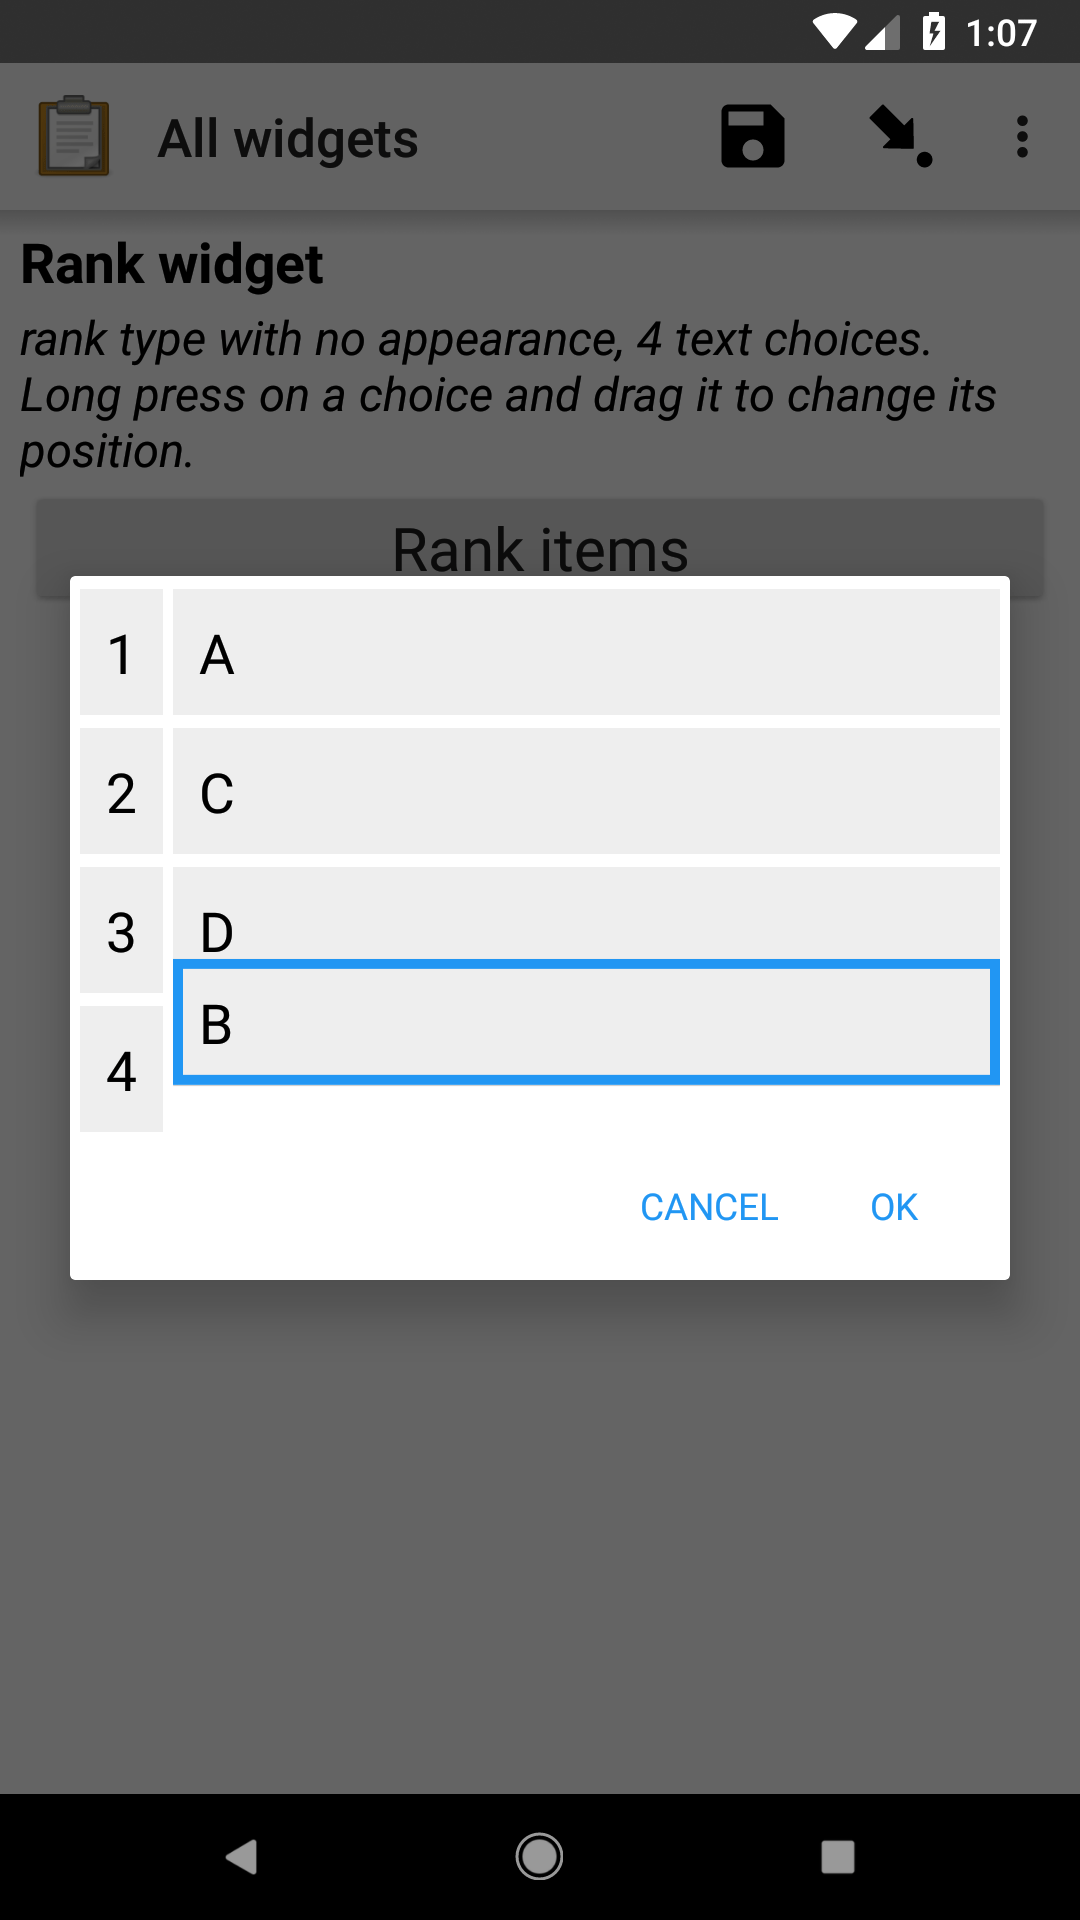 The rank widget, as displayed in the ODK Collect app on an Android phone. The question text is "Rank widget." The hint text is "rank type with no appearance, 4 text choices. Long press on a choice and drag it to change its position." A dialog is open showing the options to rank. The B option has a border around it and is being moved into position 4.